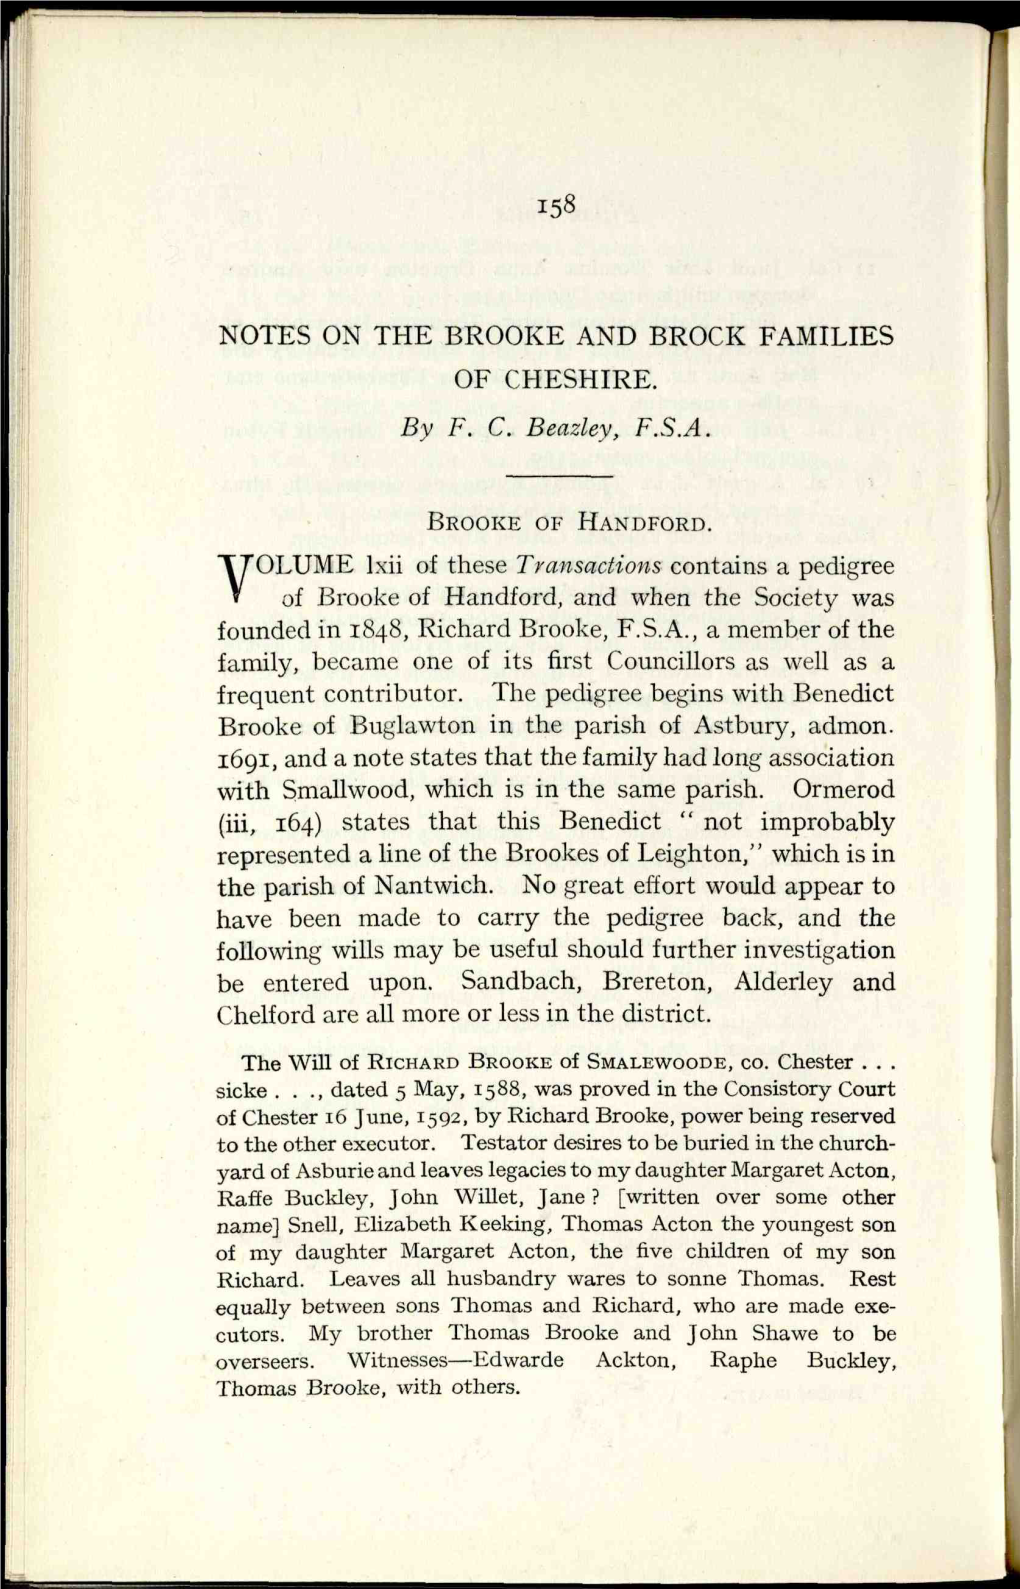 Notes on the Brooke and Brock Families of Cheshire